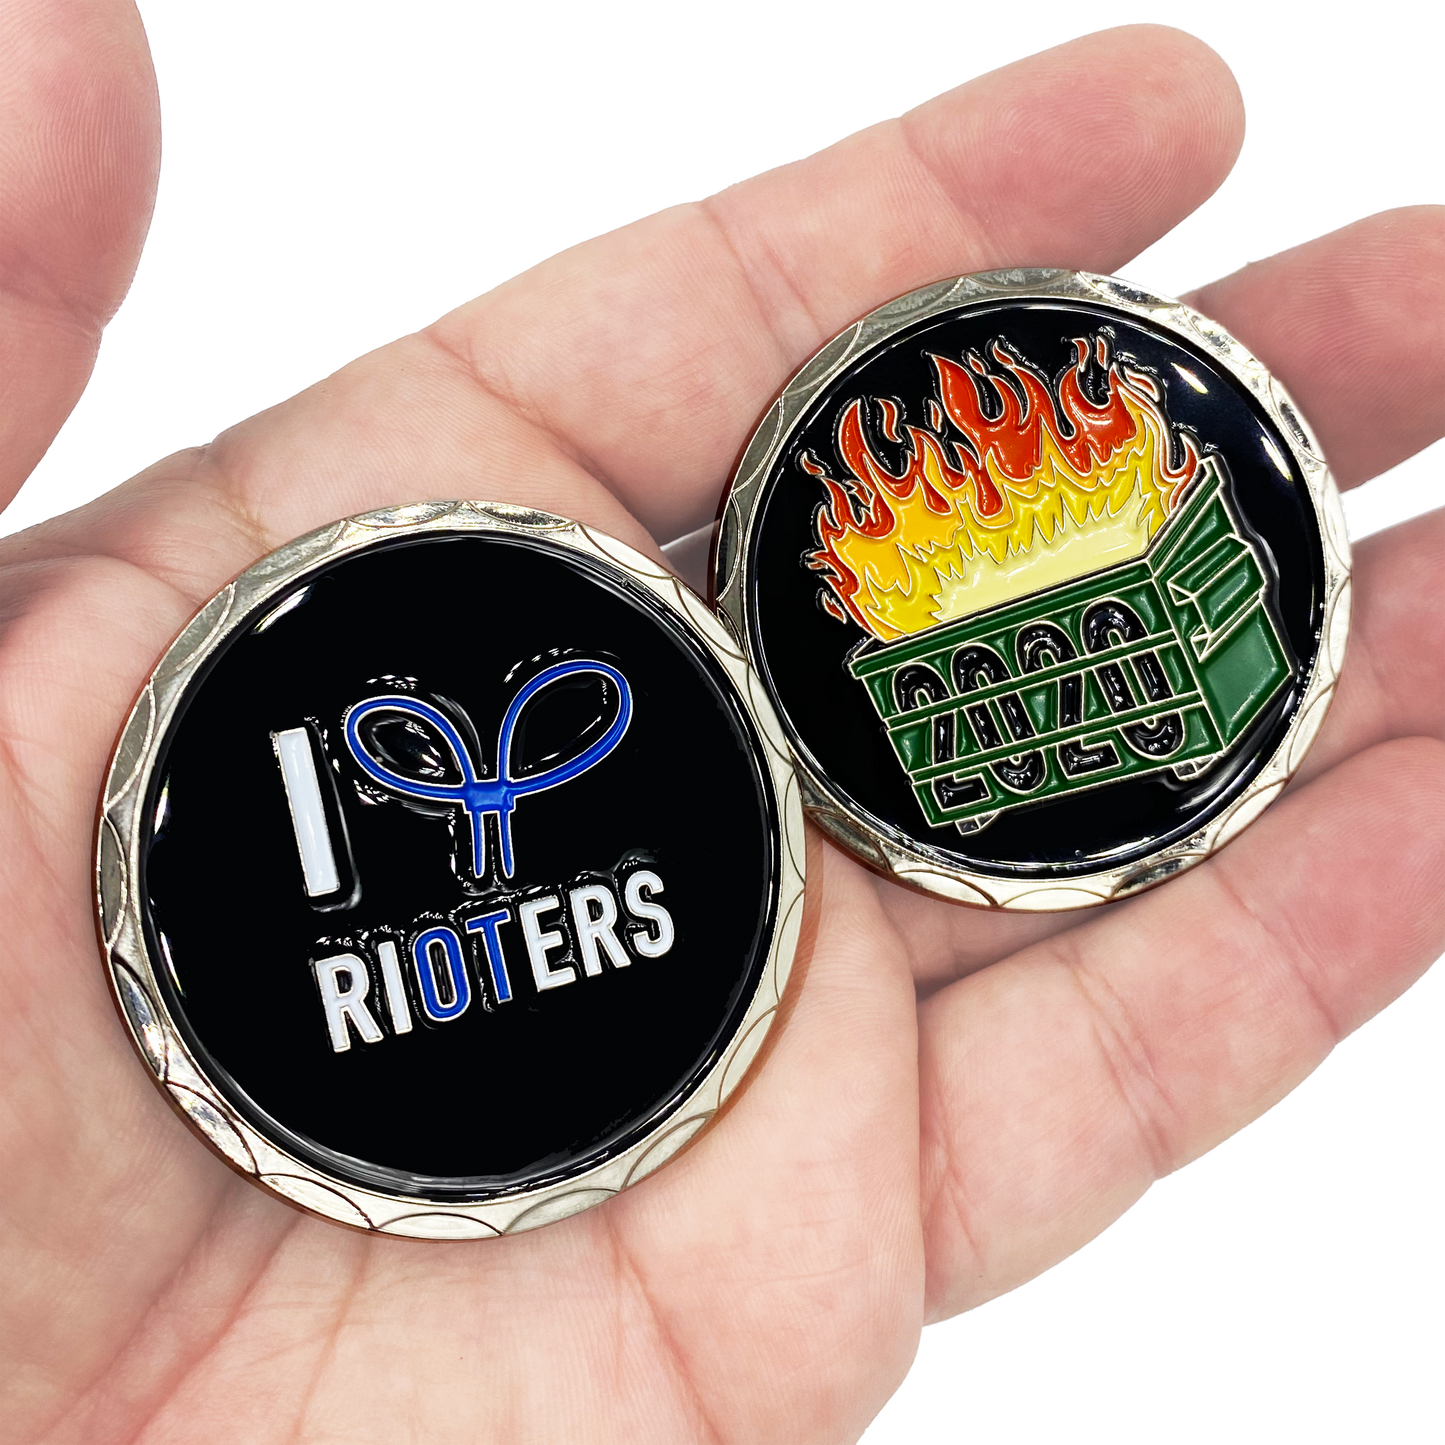 DL2-04 I Love Rioters 2020 Dumpster Fire Handcuff Zip Ties Police Thin Blue Line Overtime Challenge Coin